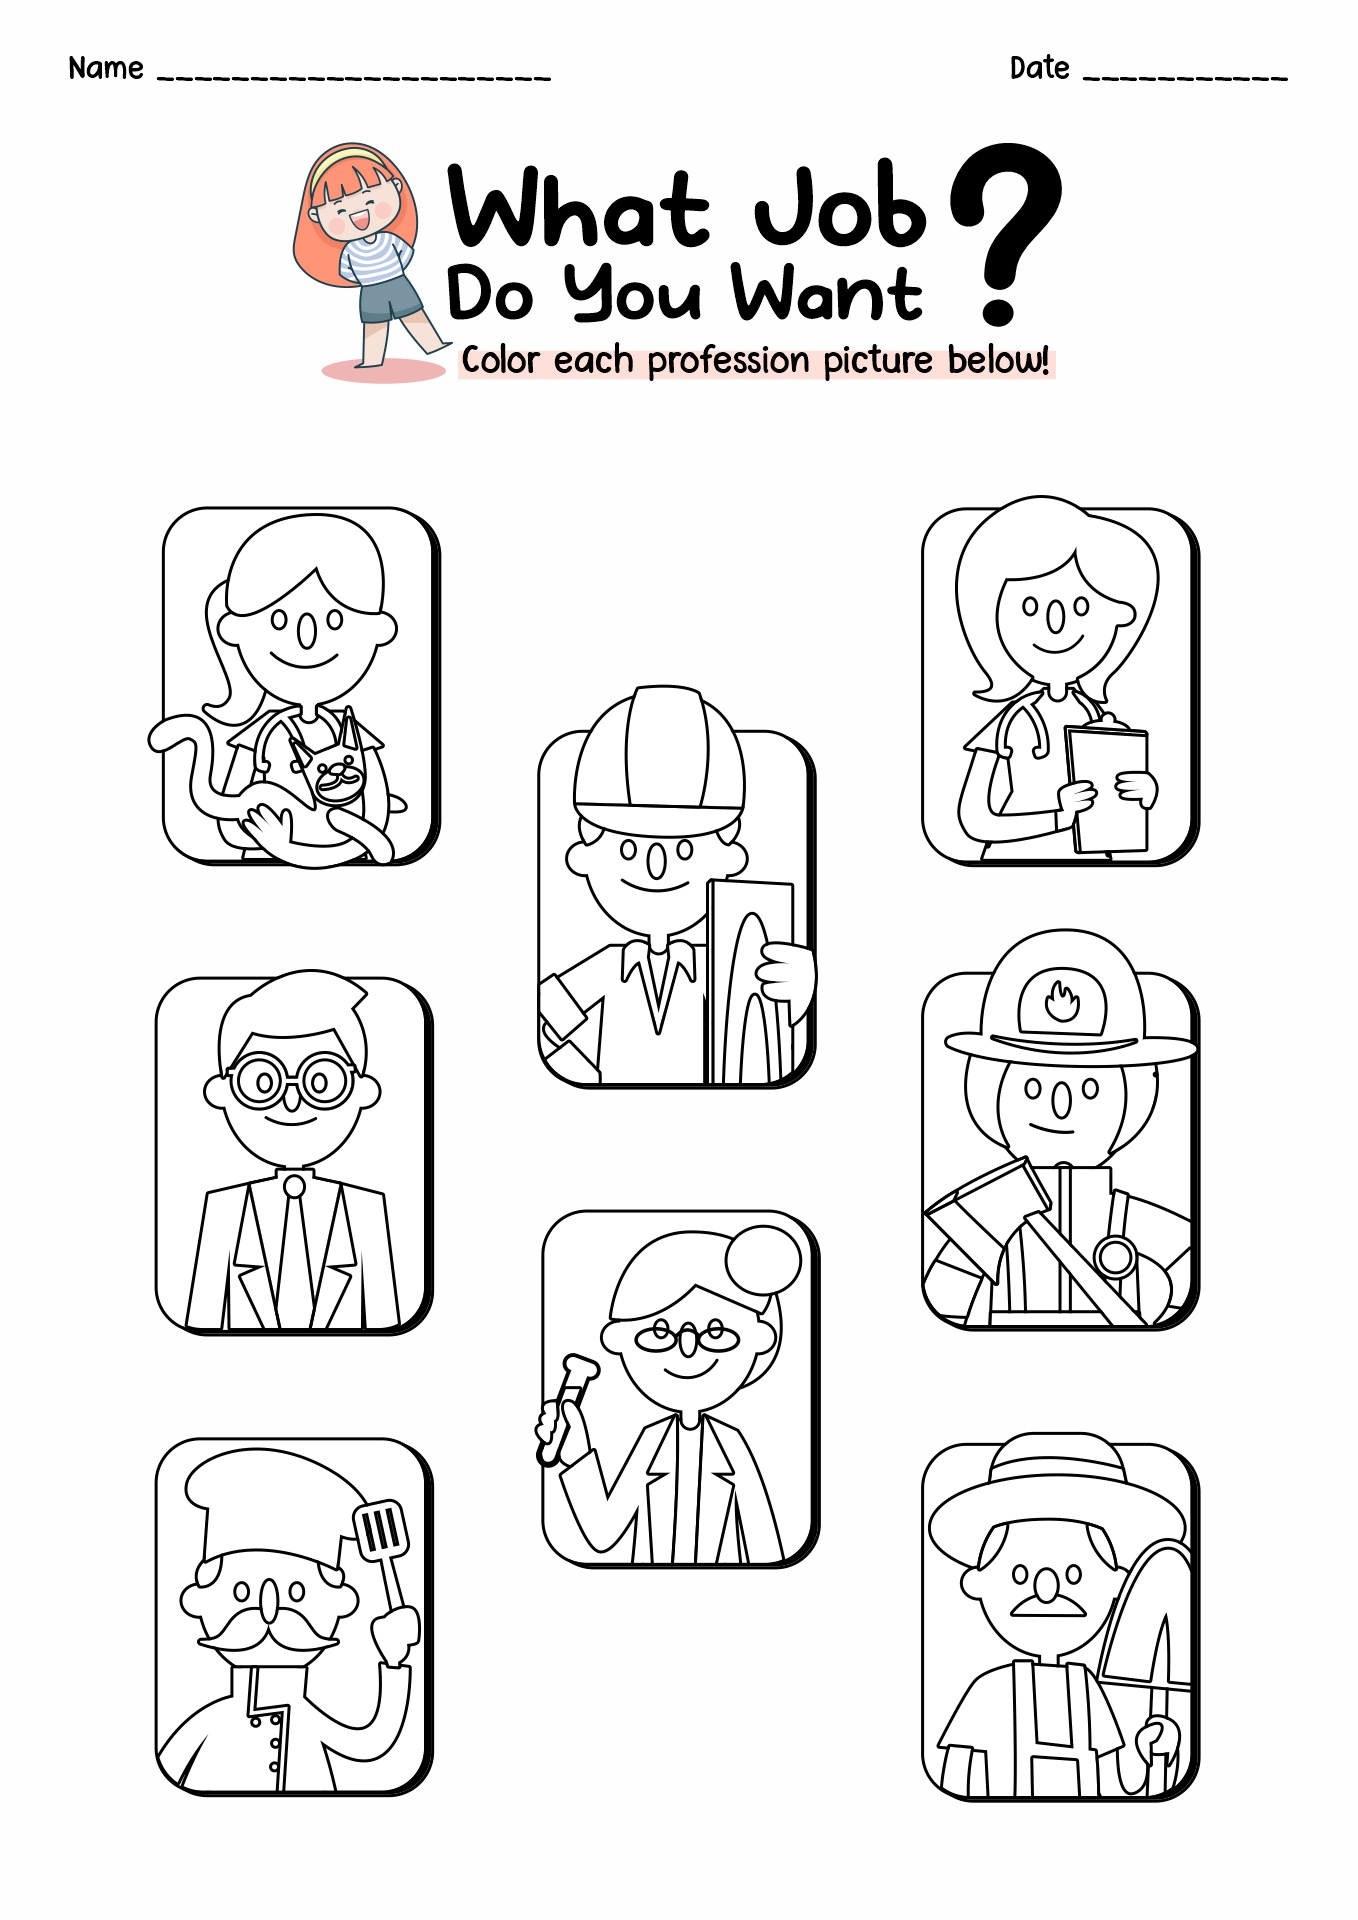 Professions Coloring Pages for Kids Image